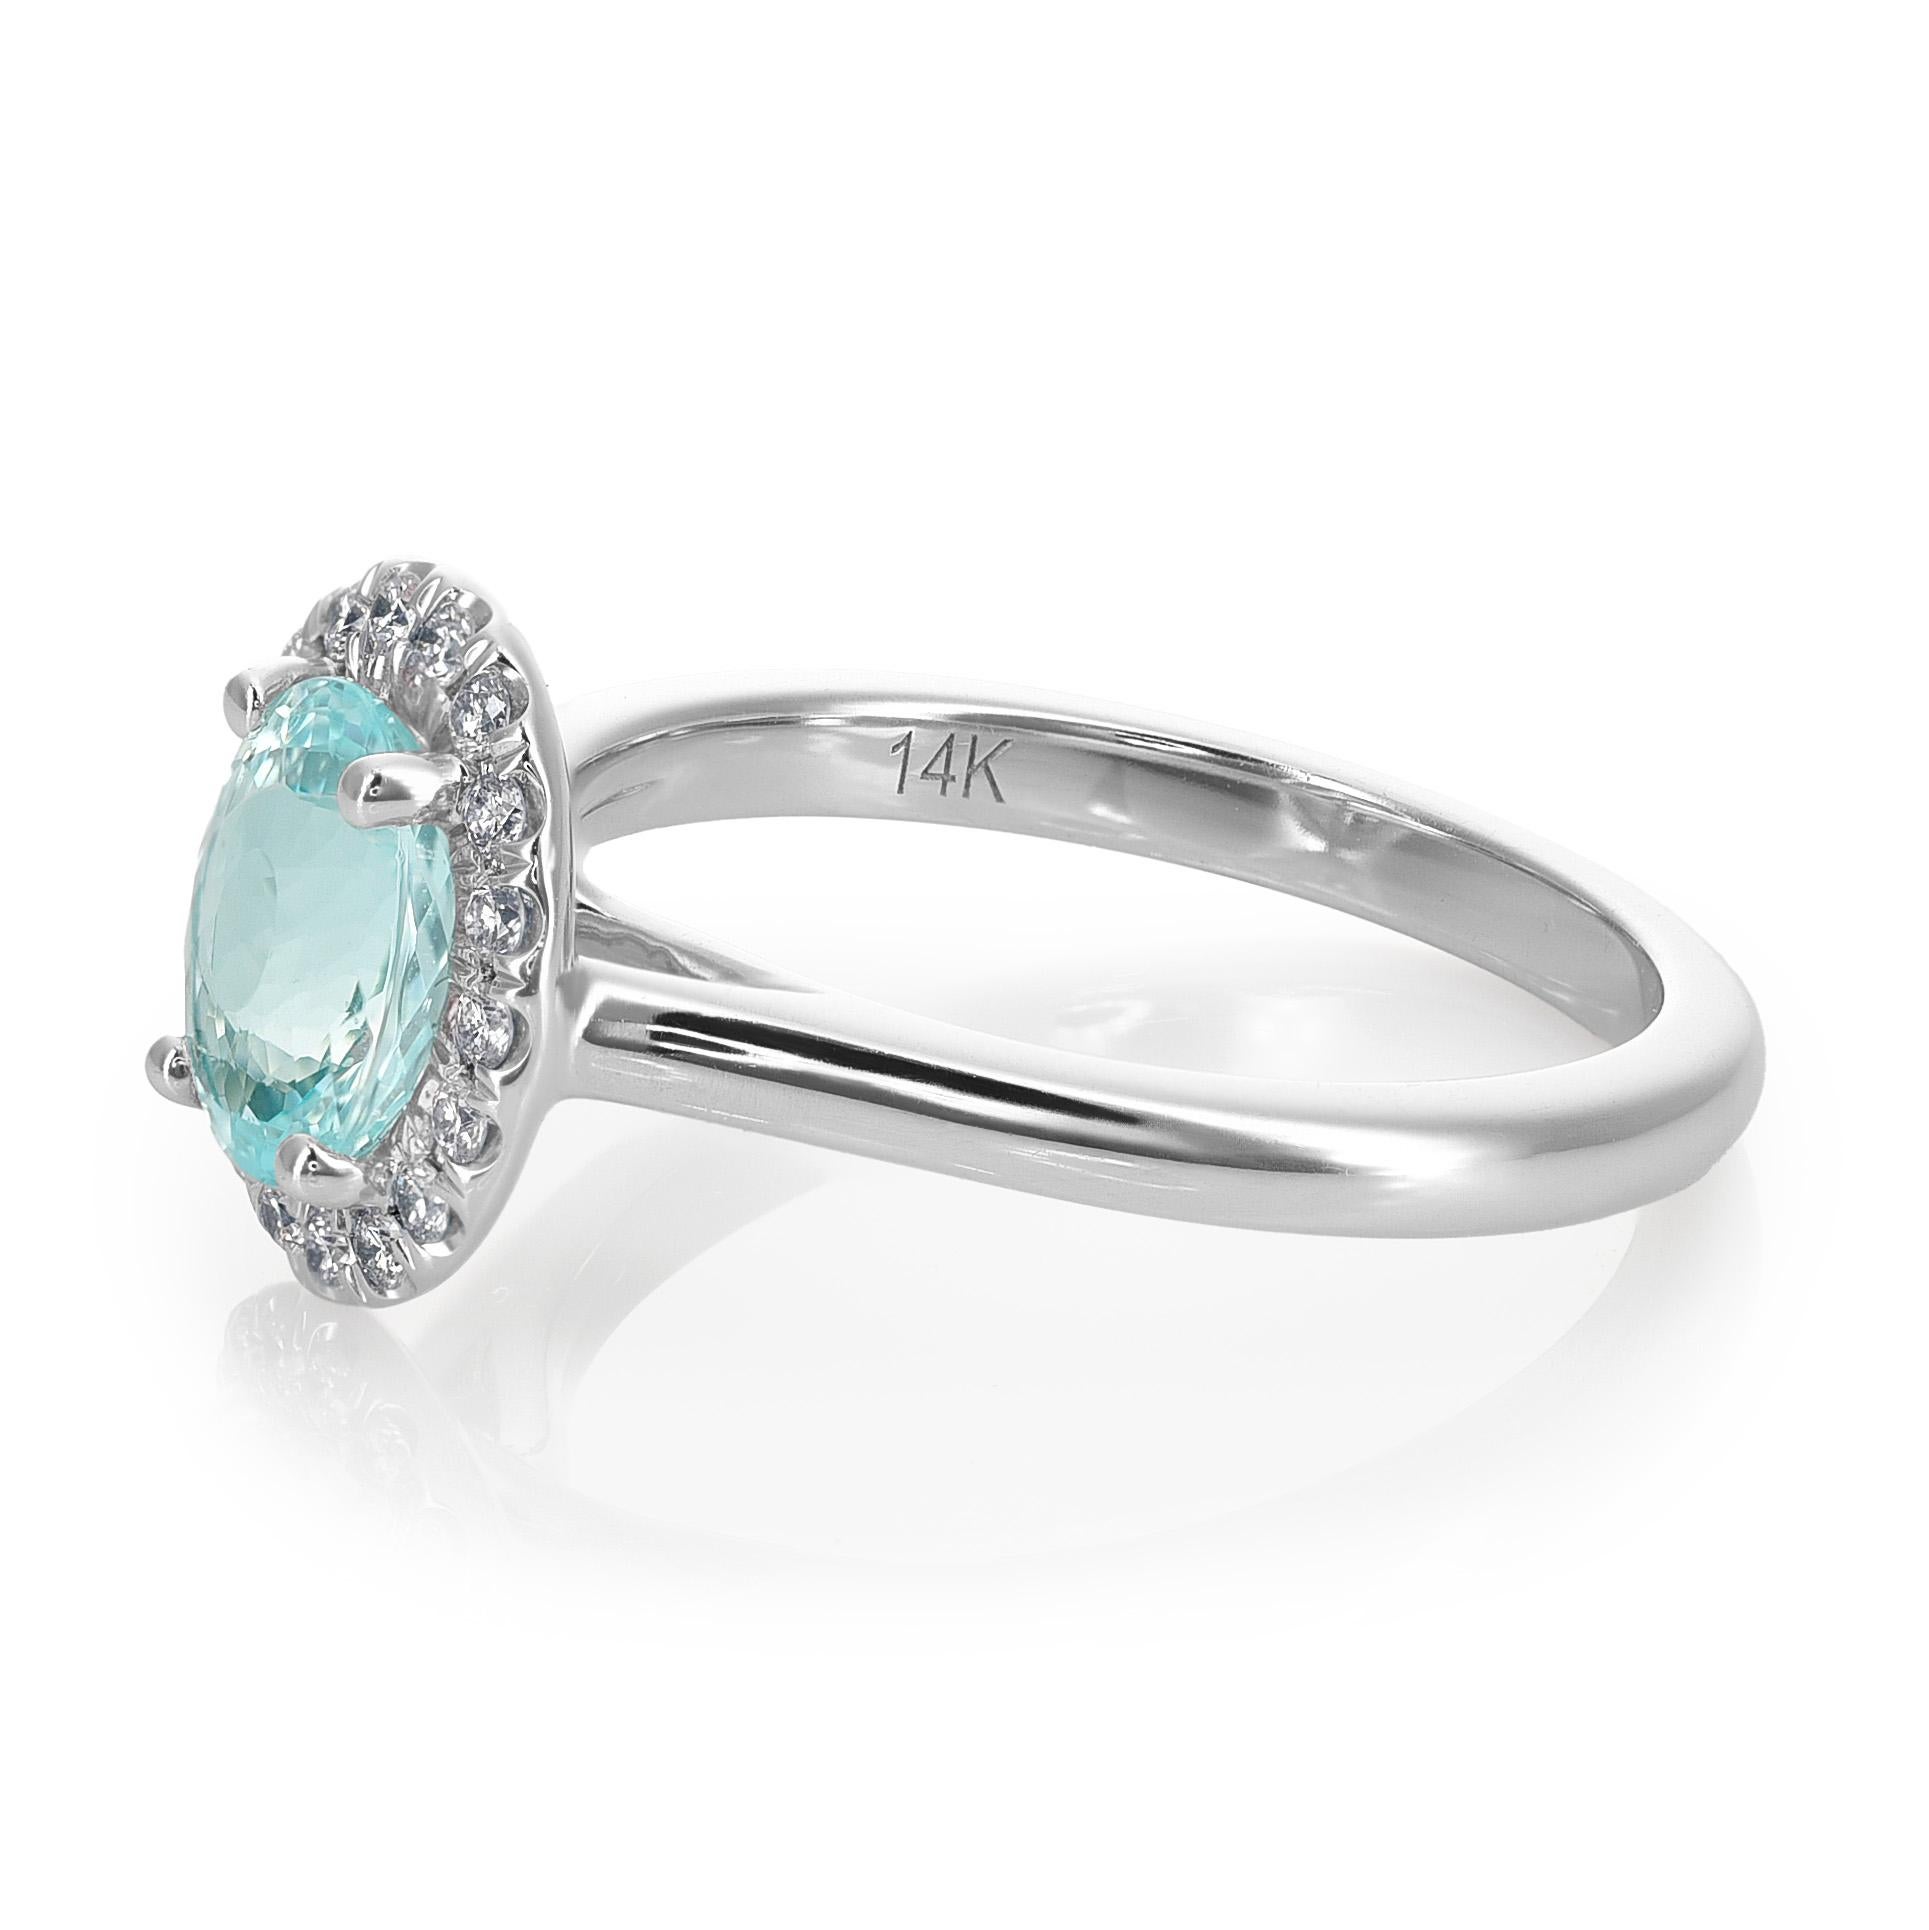 Immerse yourself in the allure of this 14K White Gold Ring, adorned with a 0.67 carats Natural Paraiba Tourmaline in an elegant oval shape. The vibrant blue-green hues of the Paraiba Tourmaline are enhanced through a meticulous heating process,